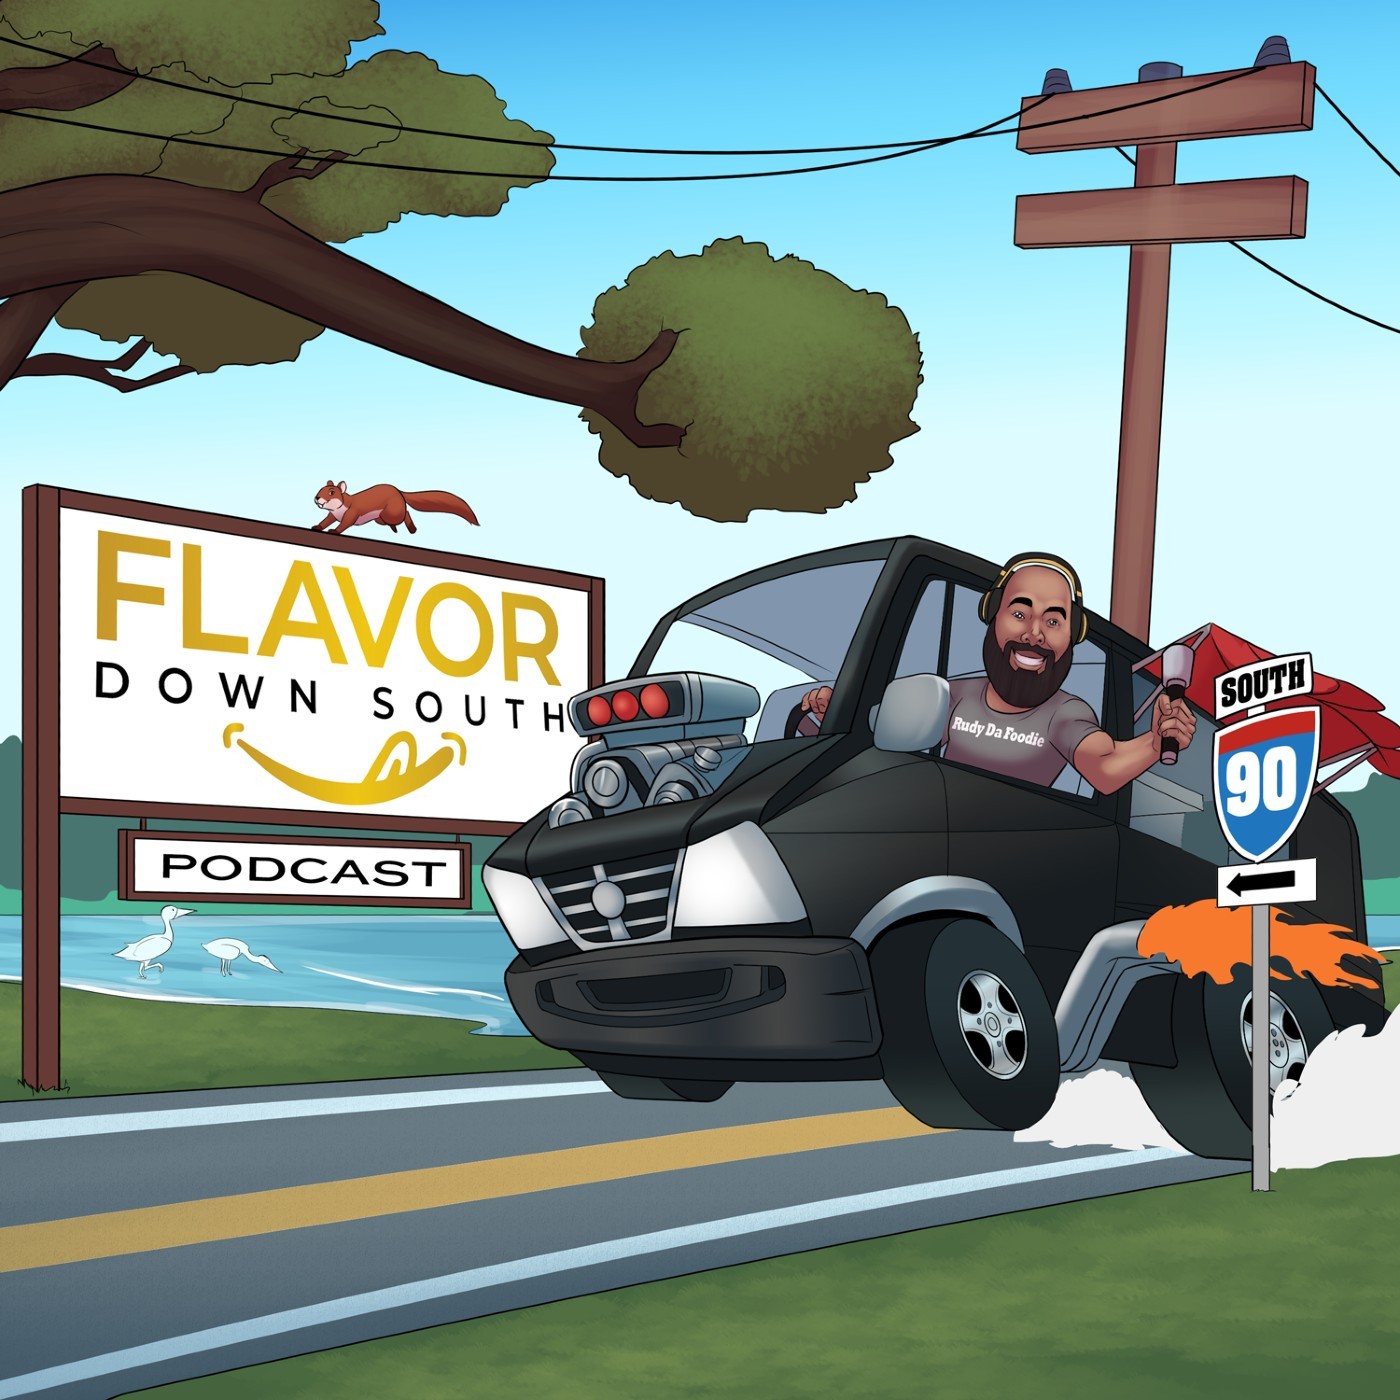 Down South Flavor Podcast